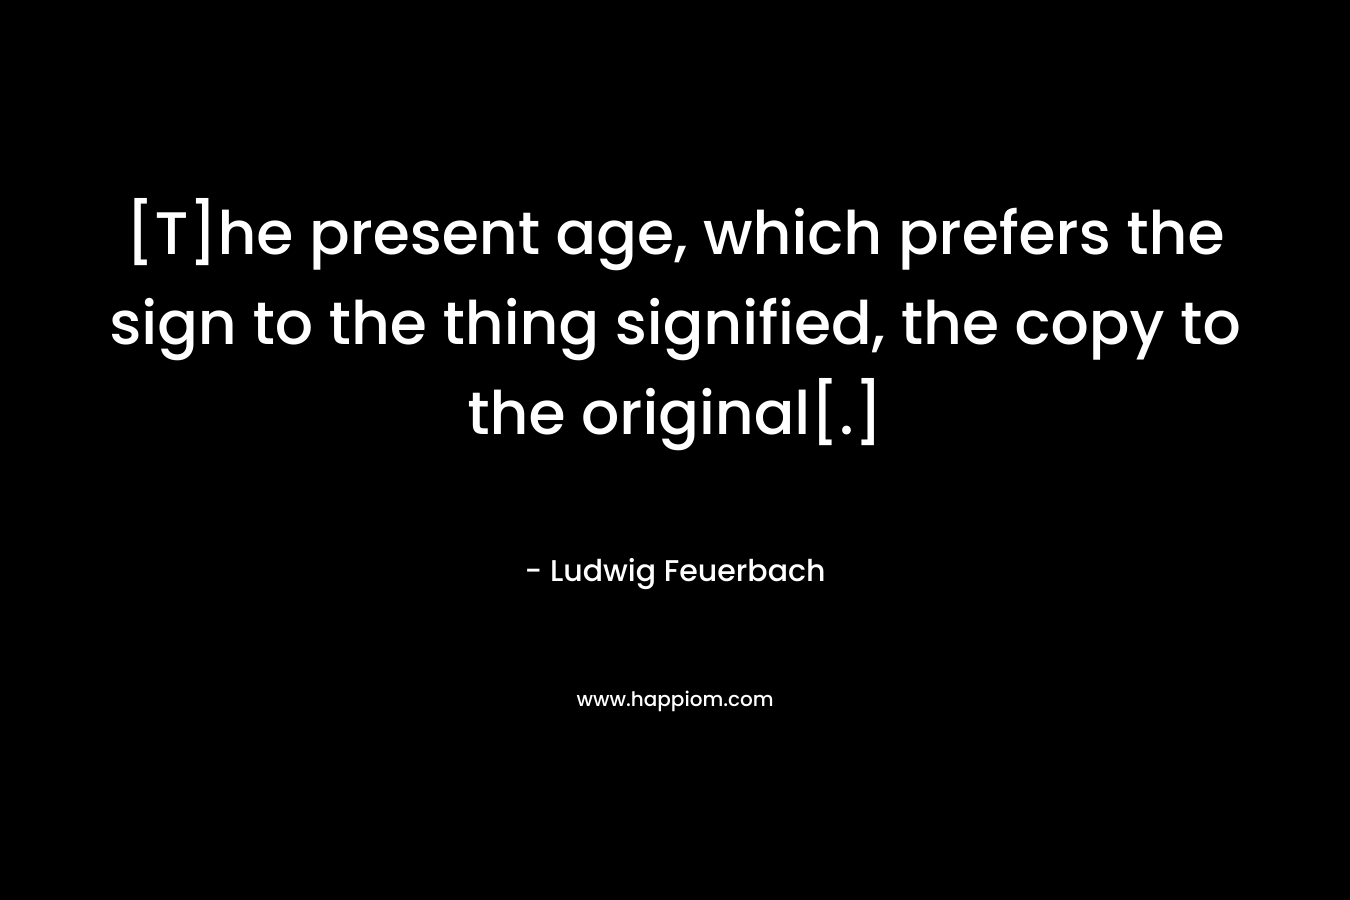 [T]he present age, which prefers the sign to the thing signified, the copy to the original[.] – Ludwig Feuerbach